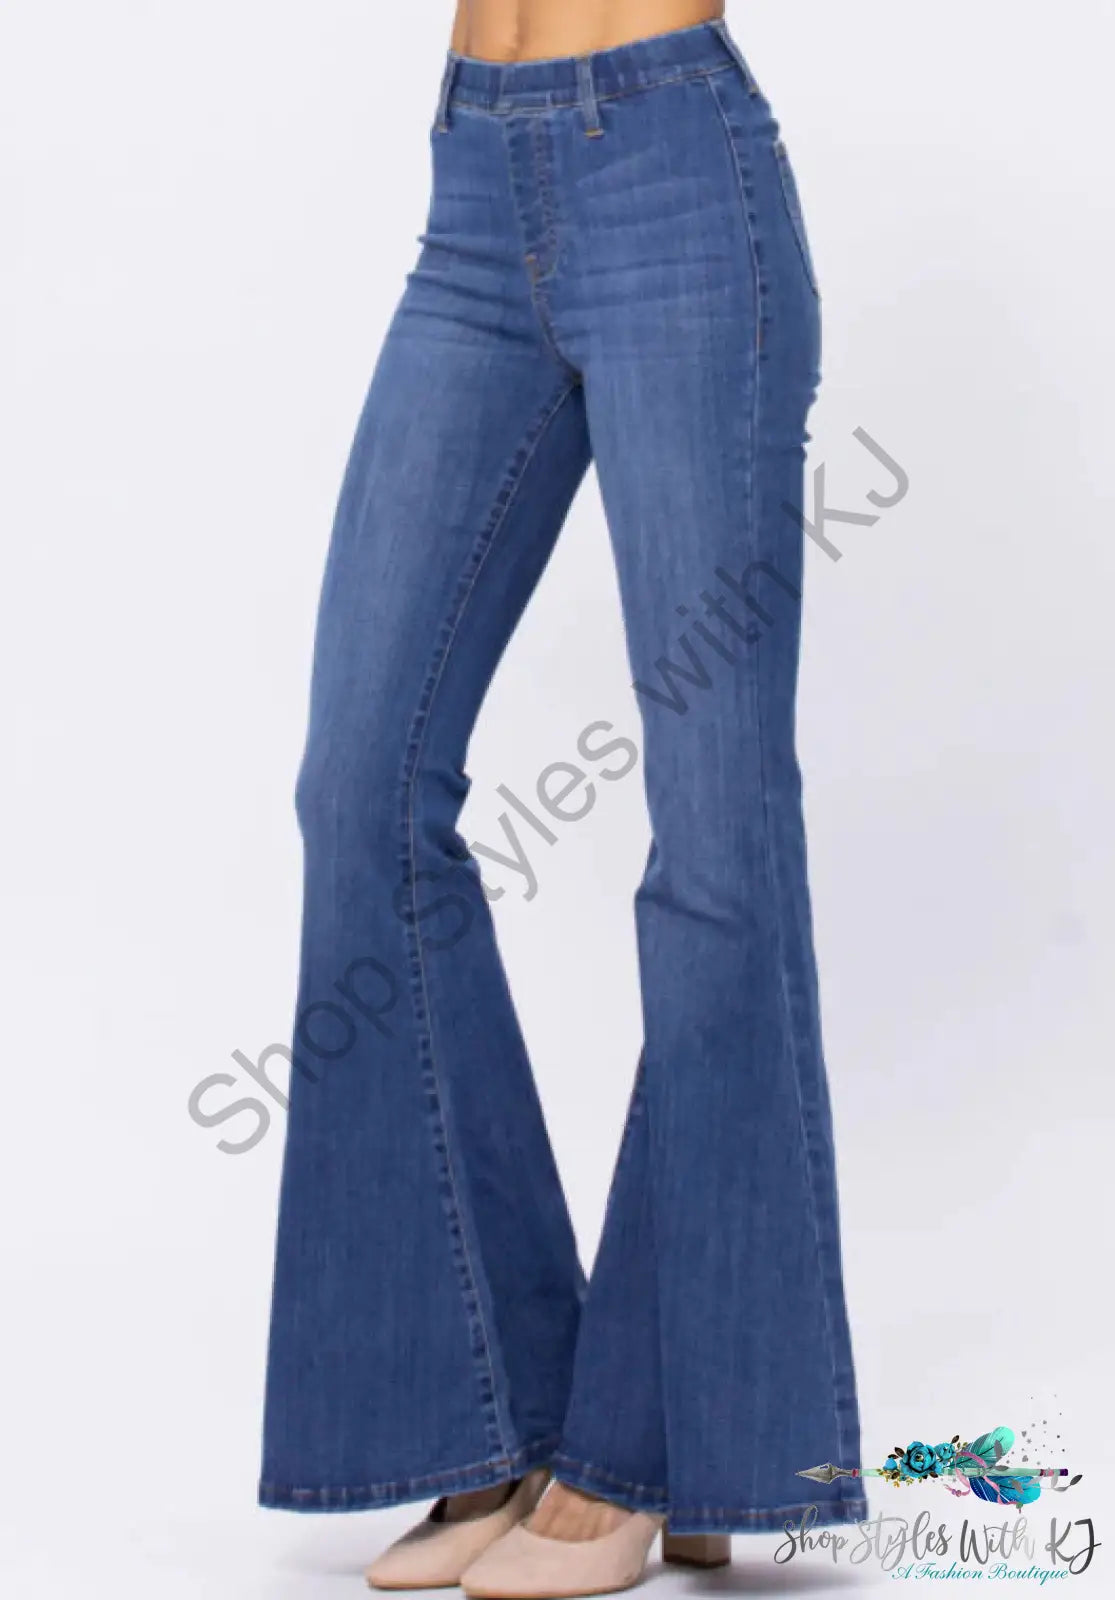 Flare For The Dramatic Judy Blue Jeans Judy Blue